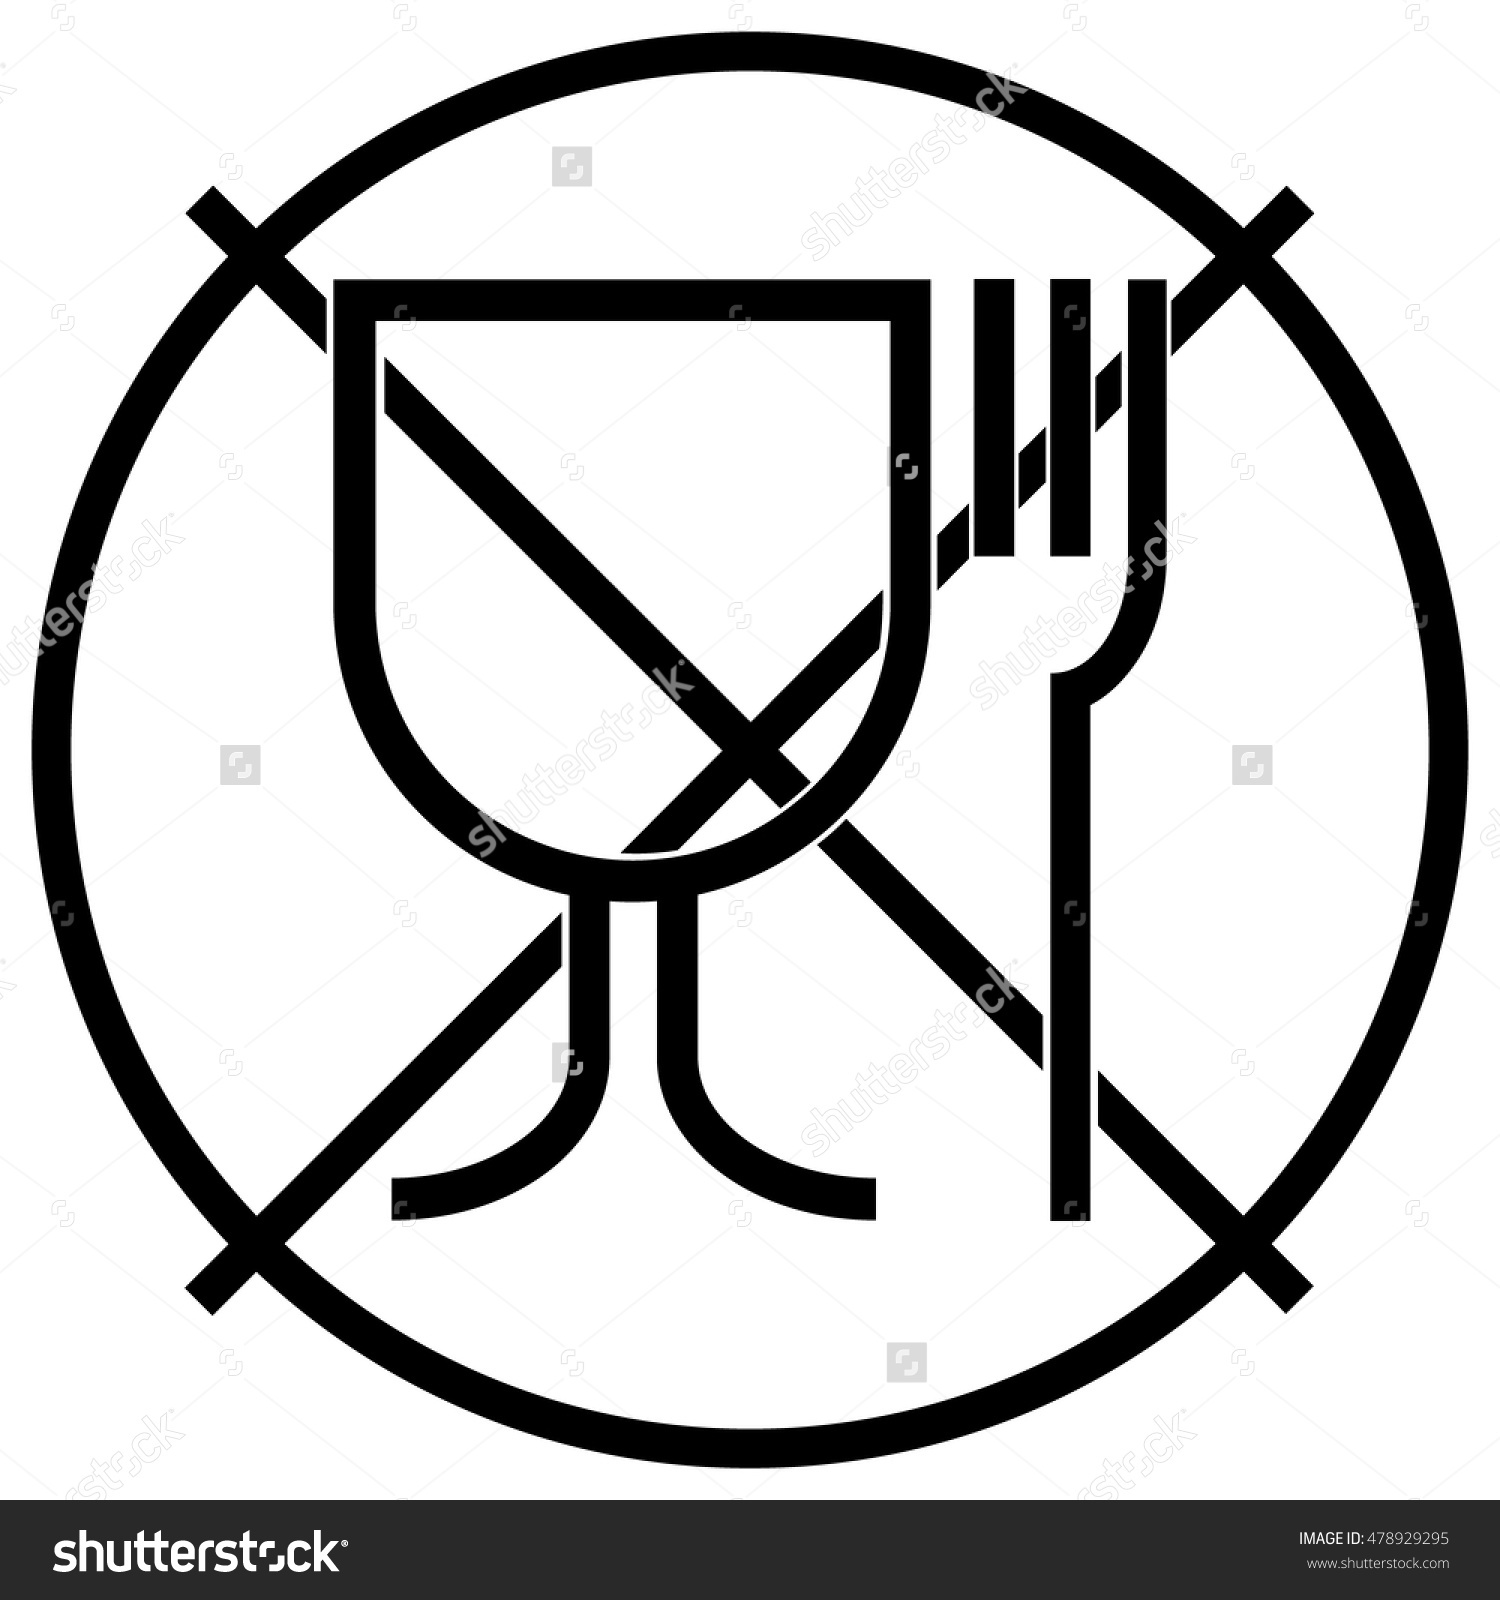 Not Suitable Food Icon No Food Stock Vector 478929295.